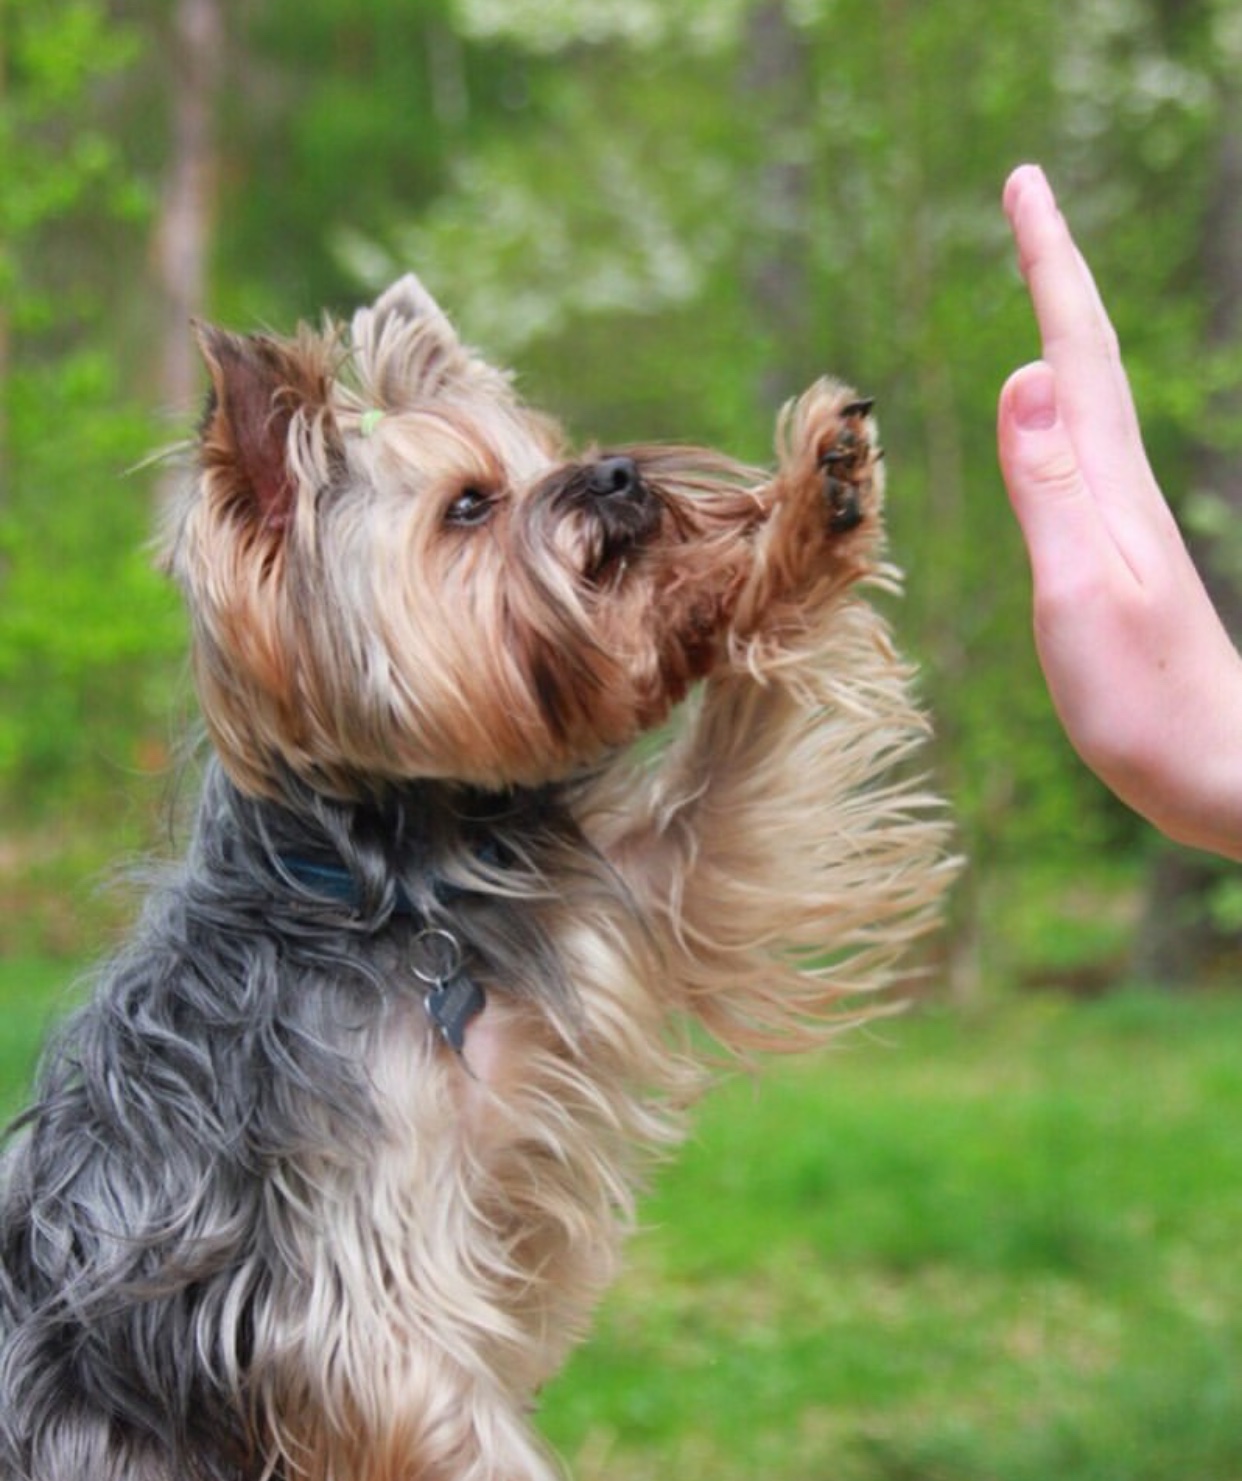 A Yorkshire Terrier giving a high-five